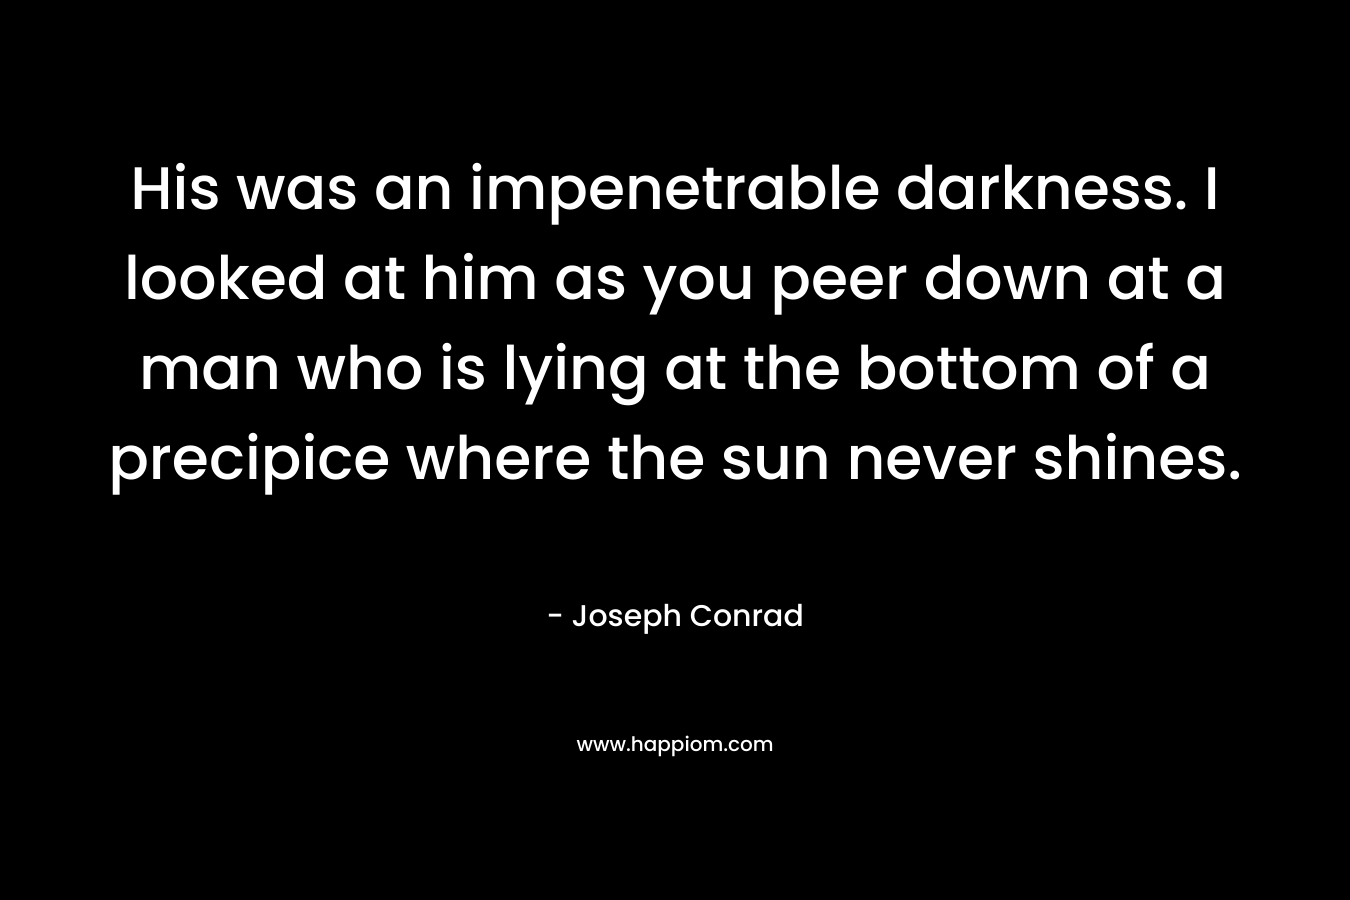 His was an impenetrable darkness. I looked at him as you peer down at a man who is lying at the bottom of a precipice where the sun never shines. – Joseph Conrad